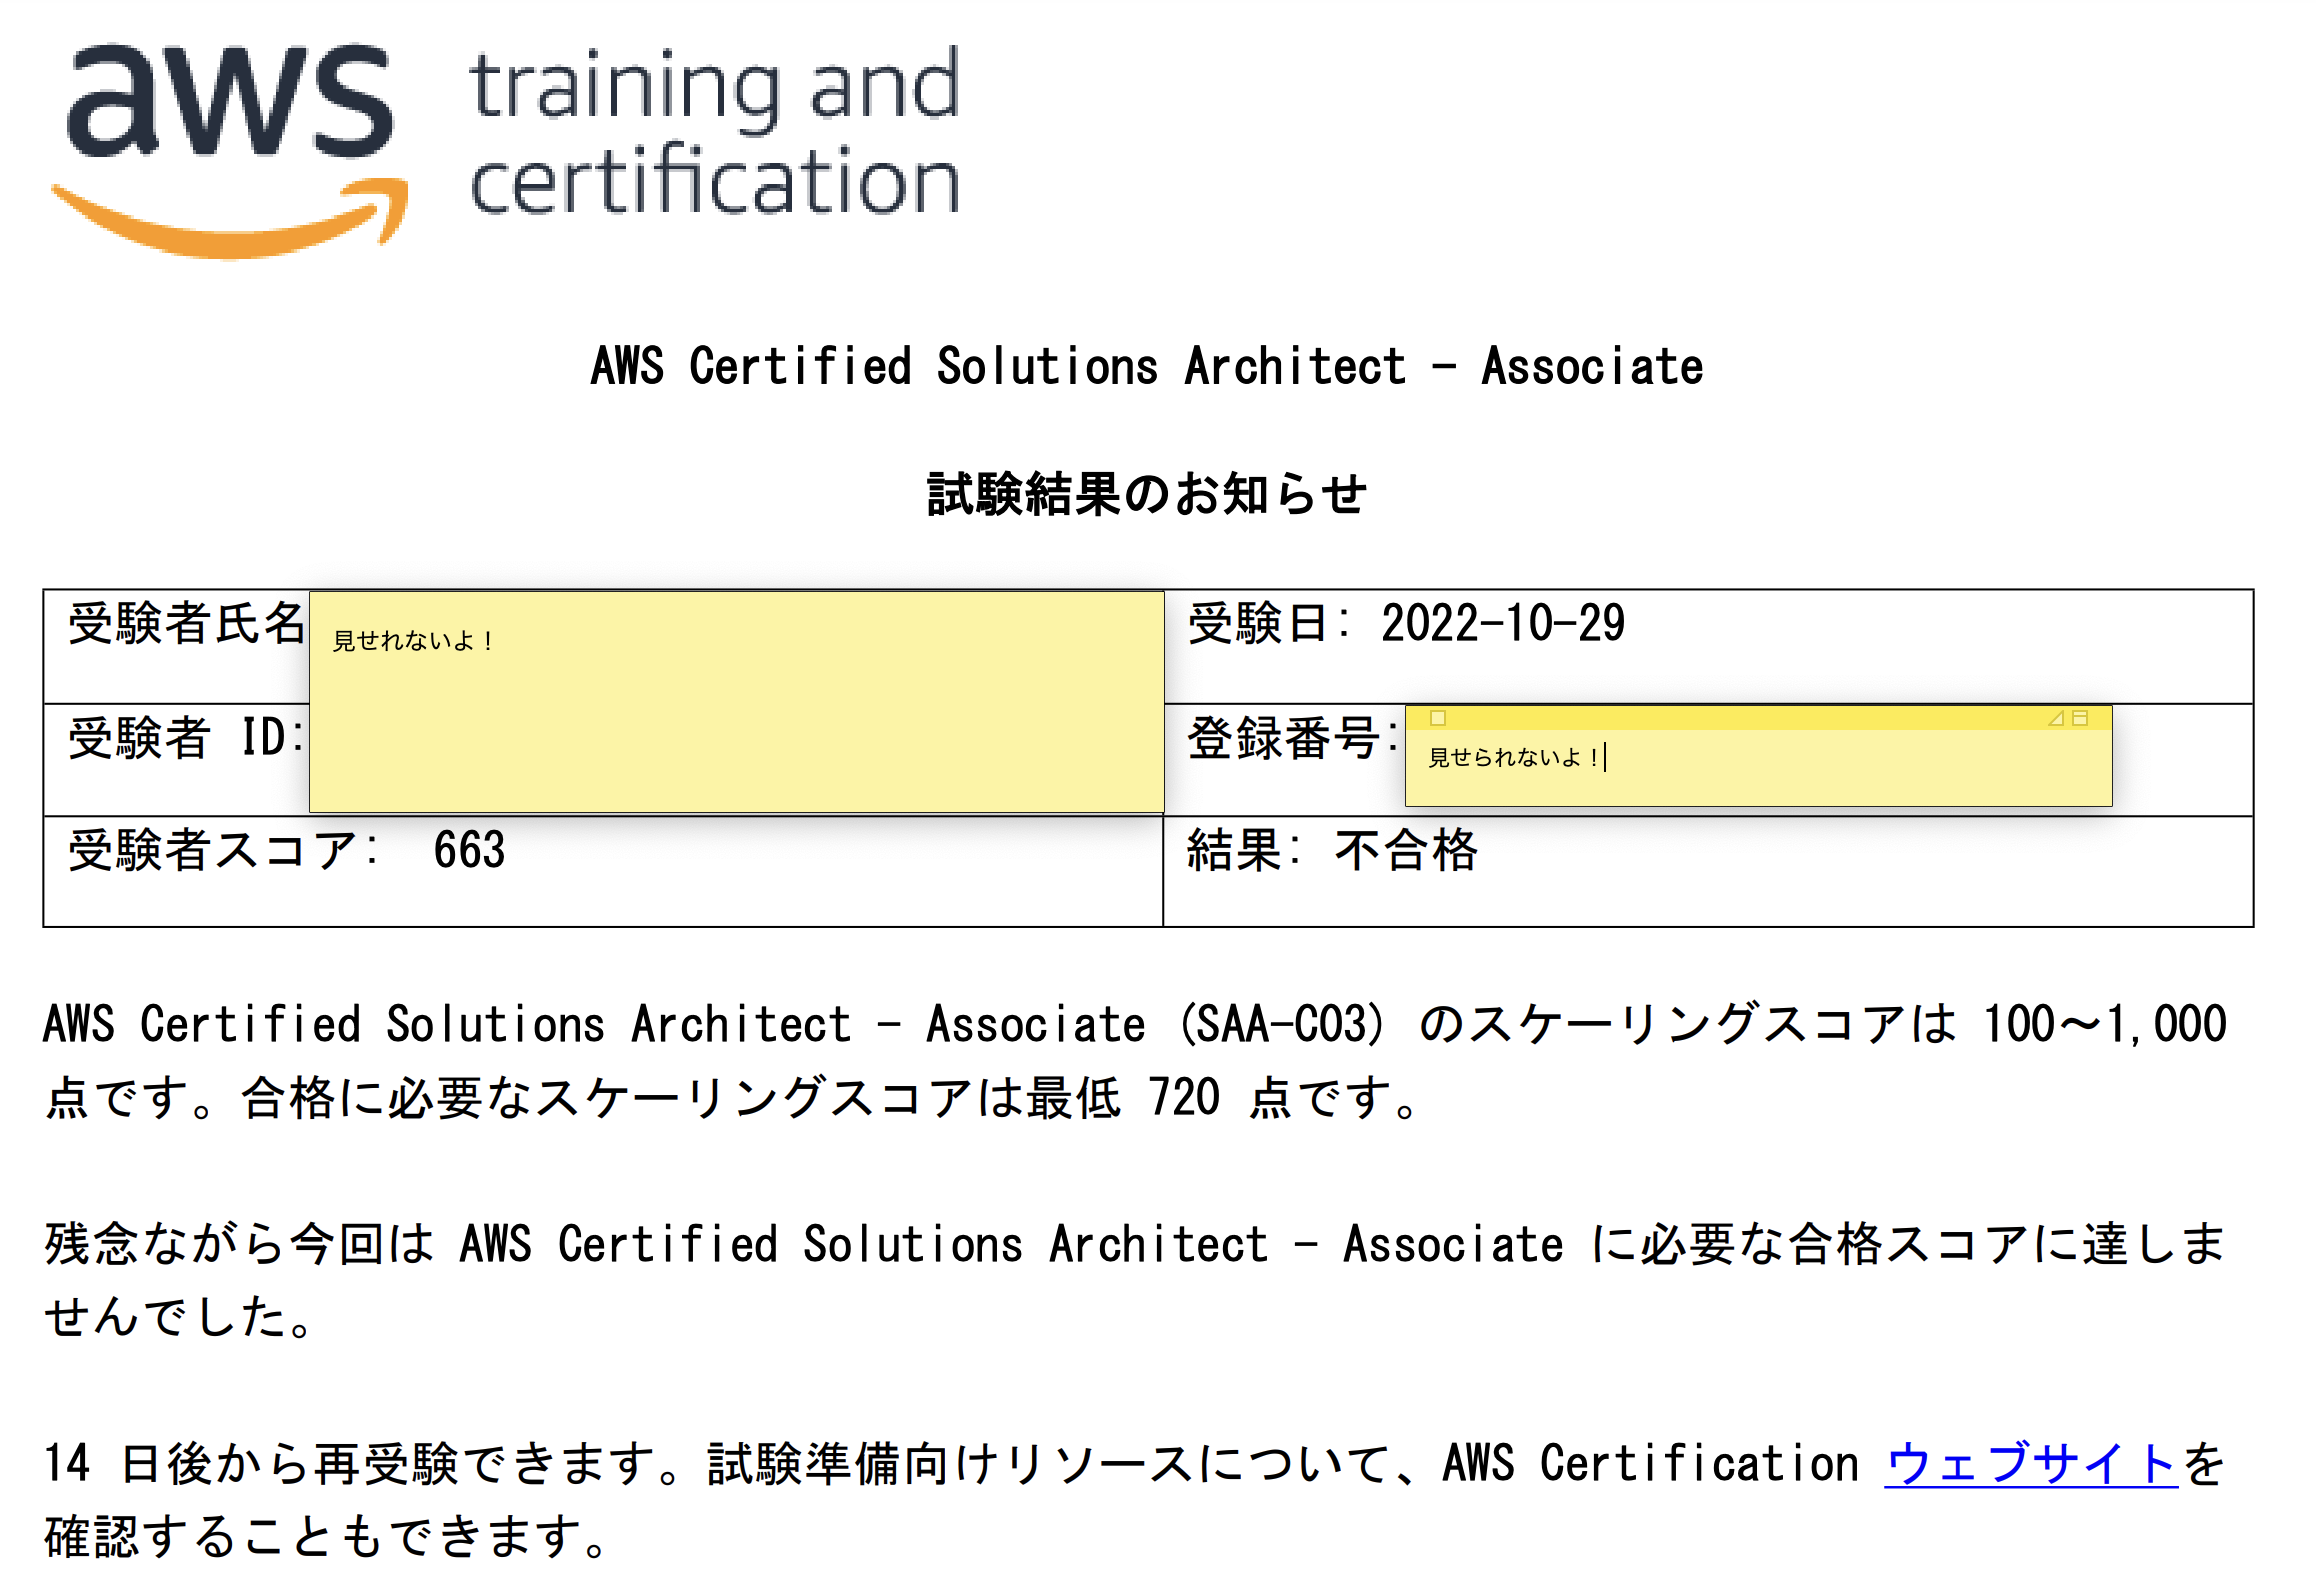 【AWS】AWS Certified Solutions Architect - Associate結果発表…!